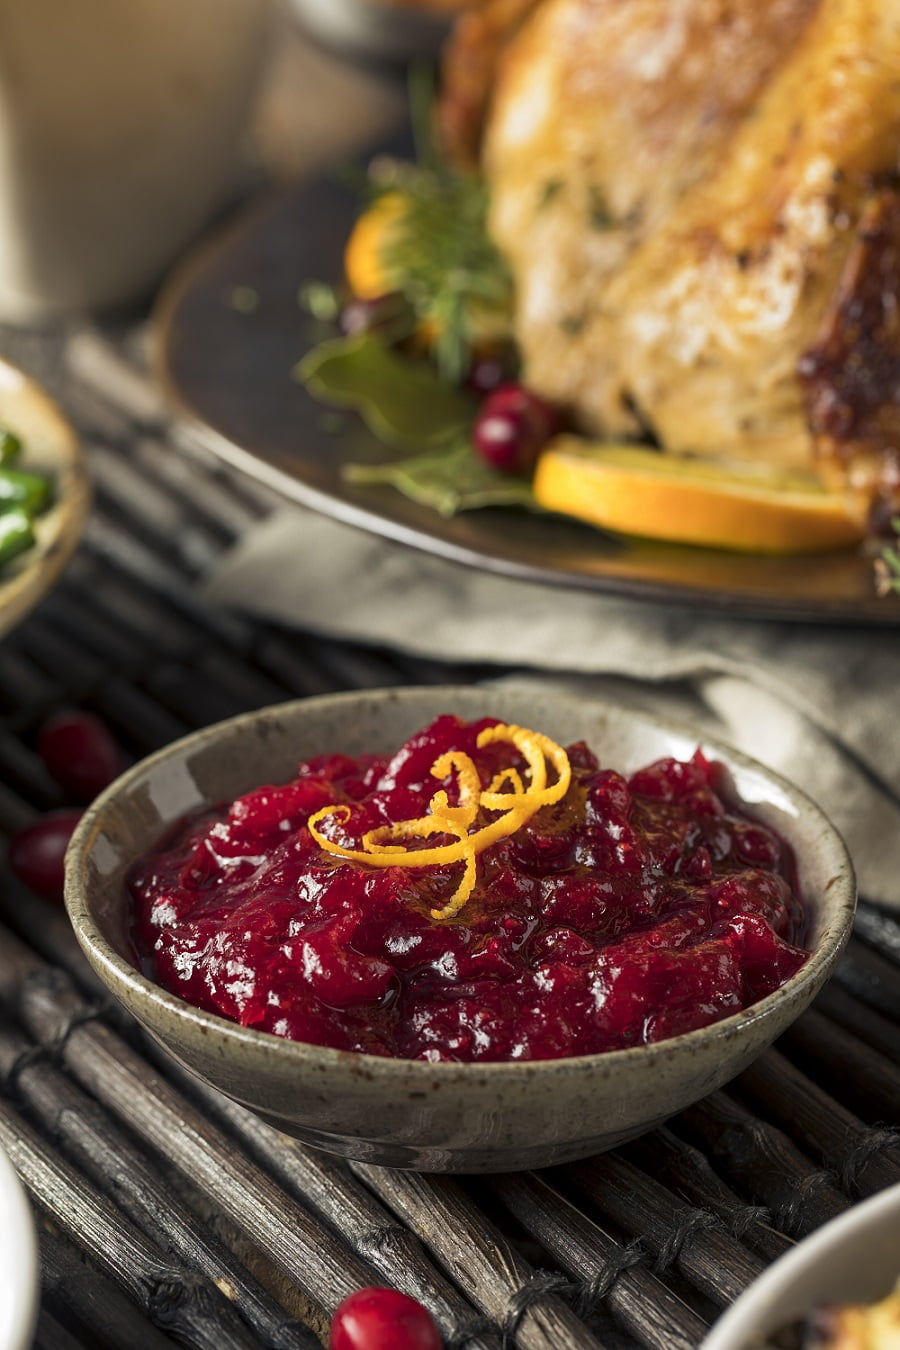 How To Make Delicious Maple Cranberry Sauce #recipe #holiday #vegan